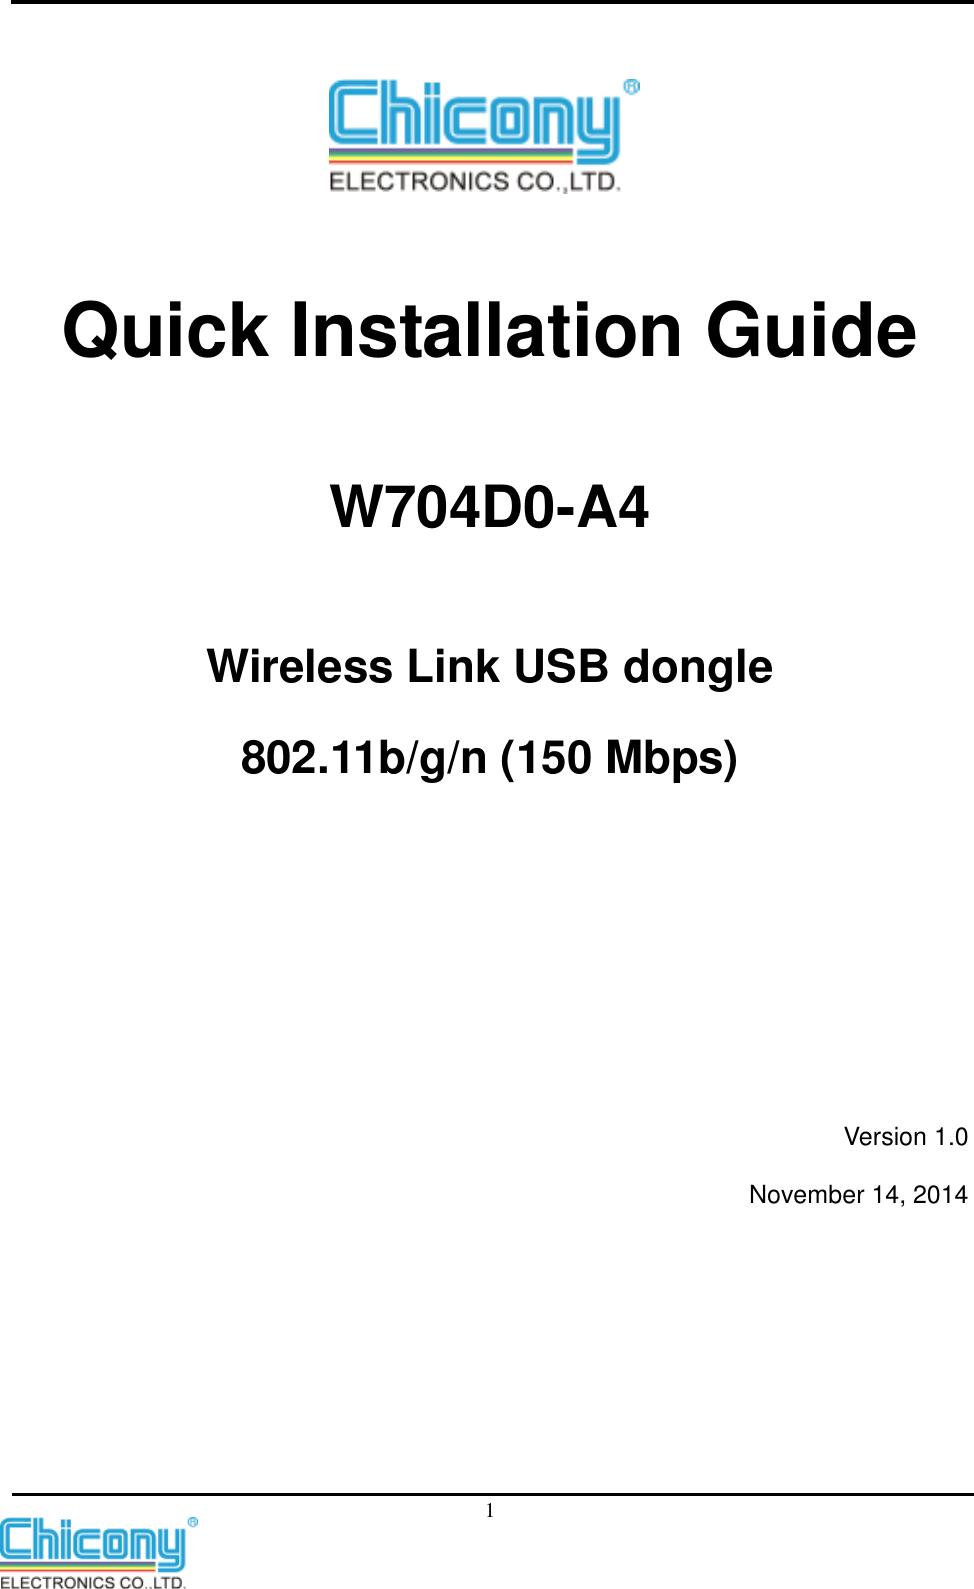    1  Quick Installation Guide W704D0-A4   Wireless Link USB dongle 802.11b/g/n (150 Mbps)      Version 1.0 November 14, 2014 